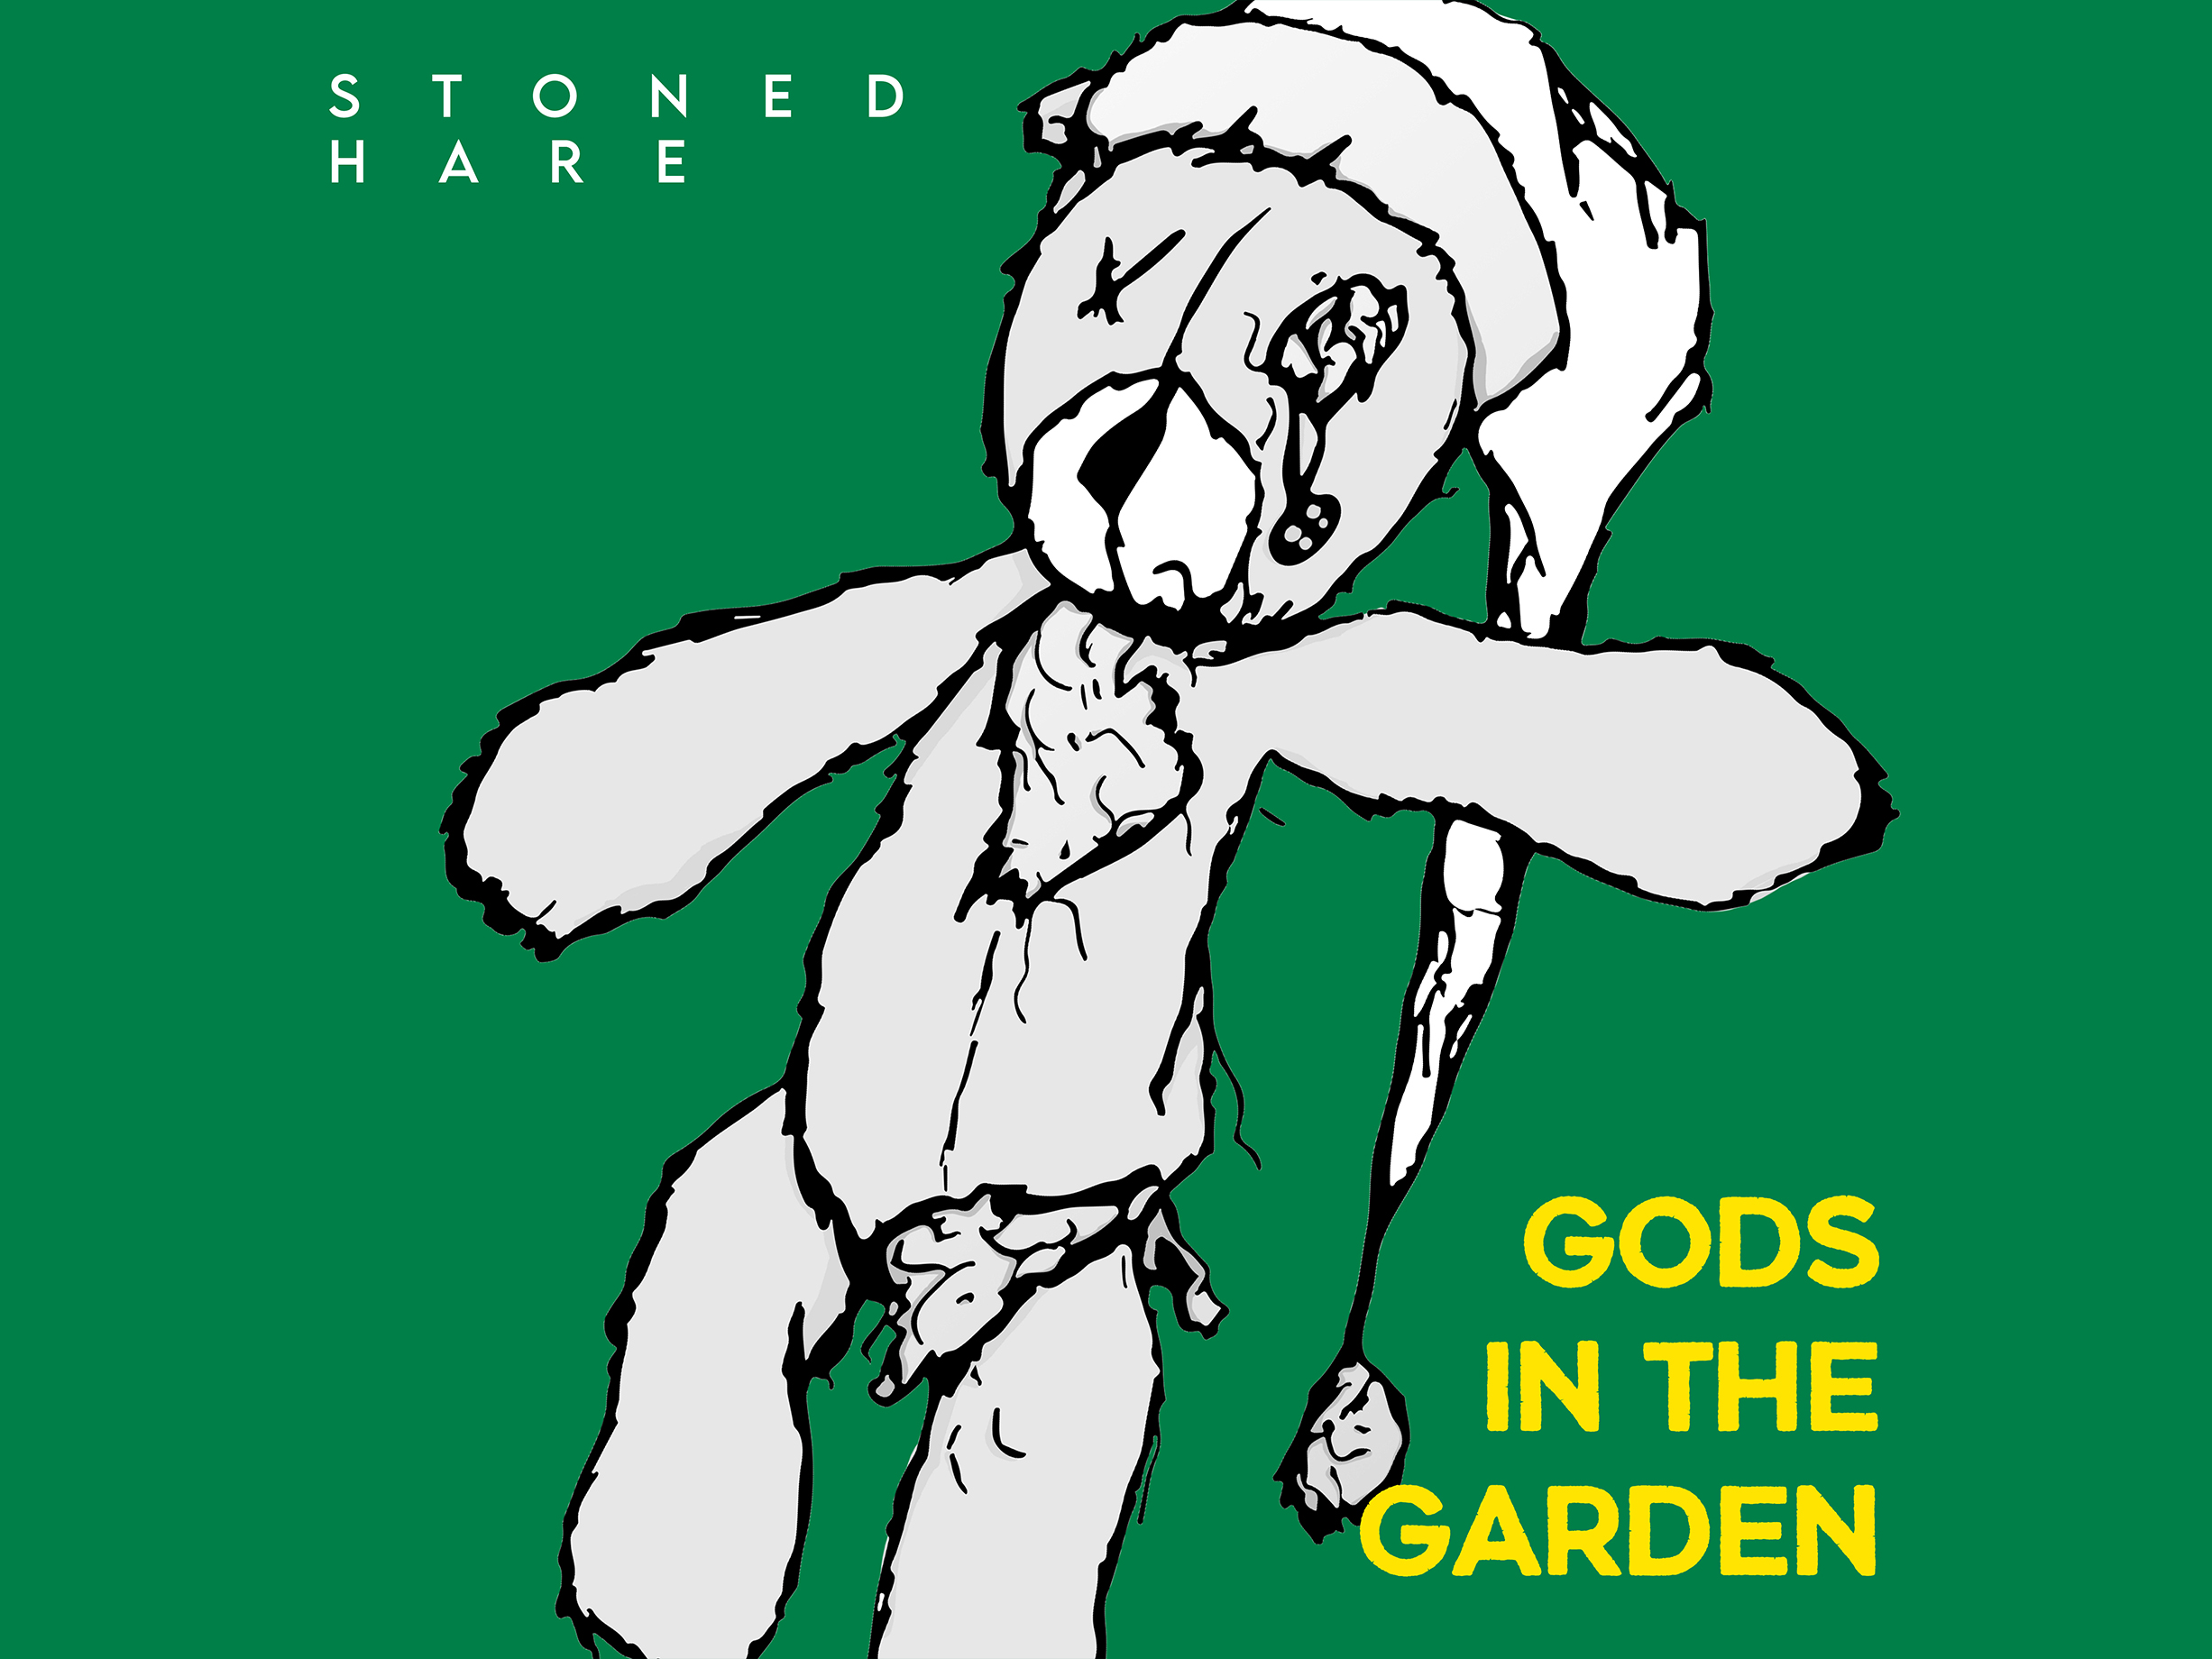 NEW SINGLE GODS IN THE GARDEN AND 5 YEARS OF STONED HARE